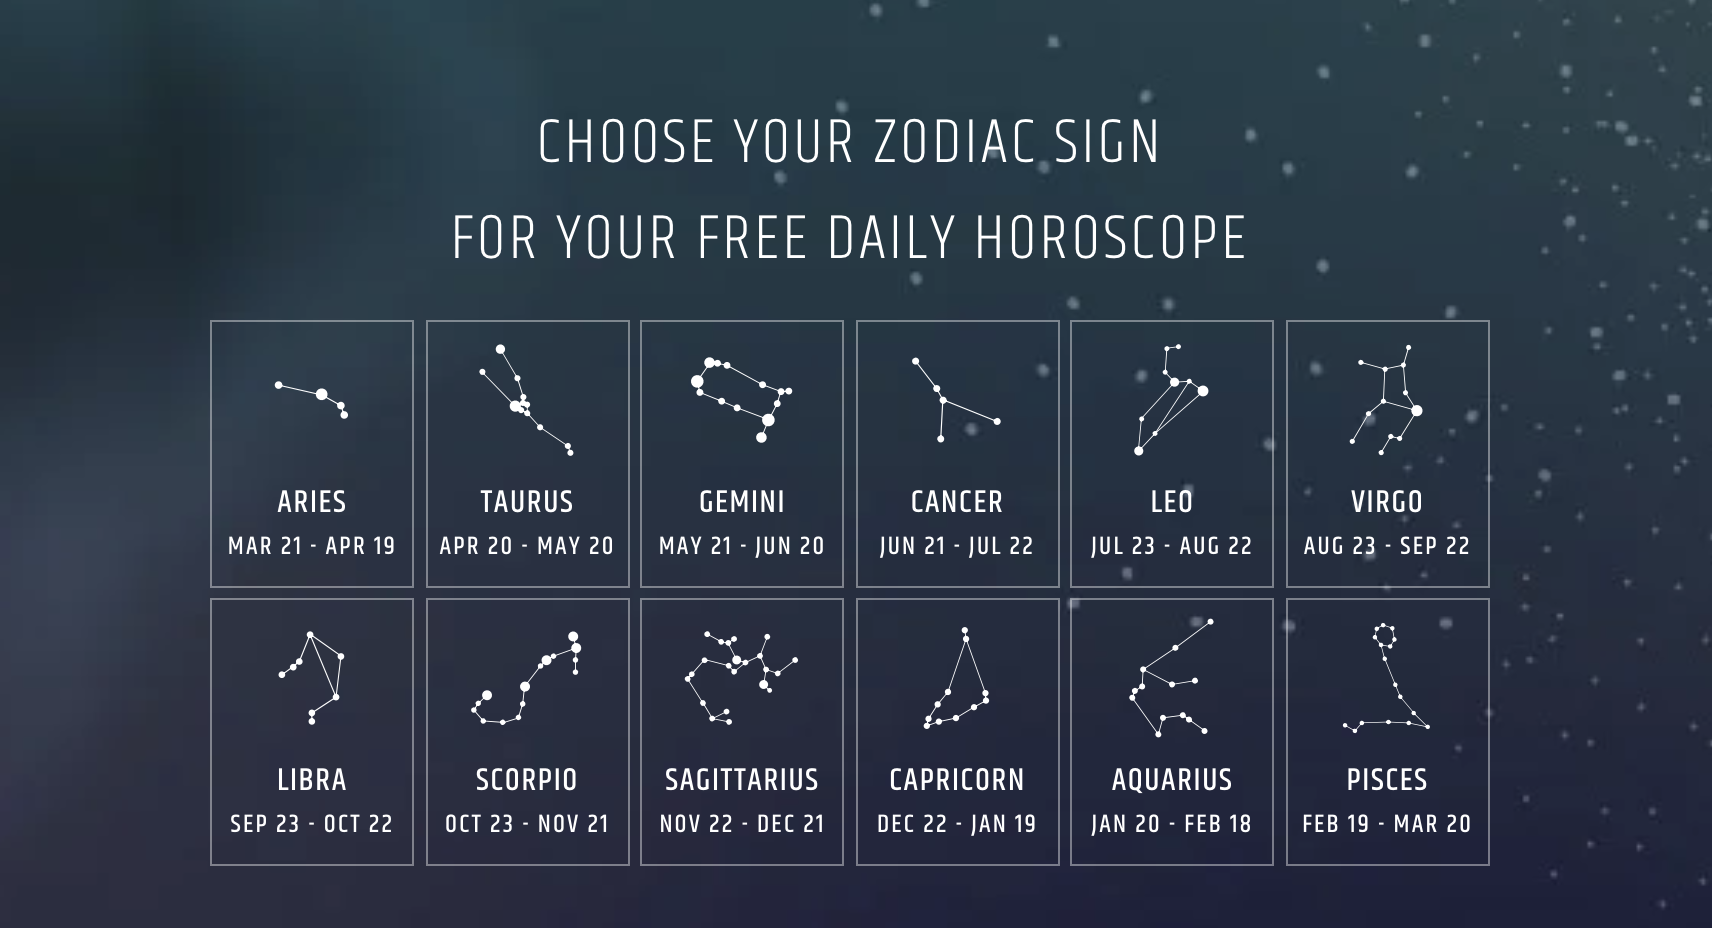 personal reading astrology